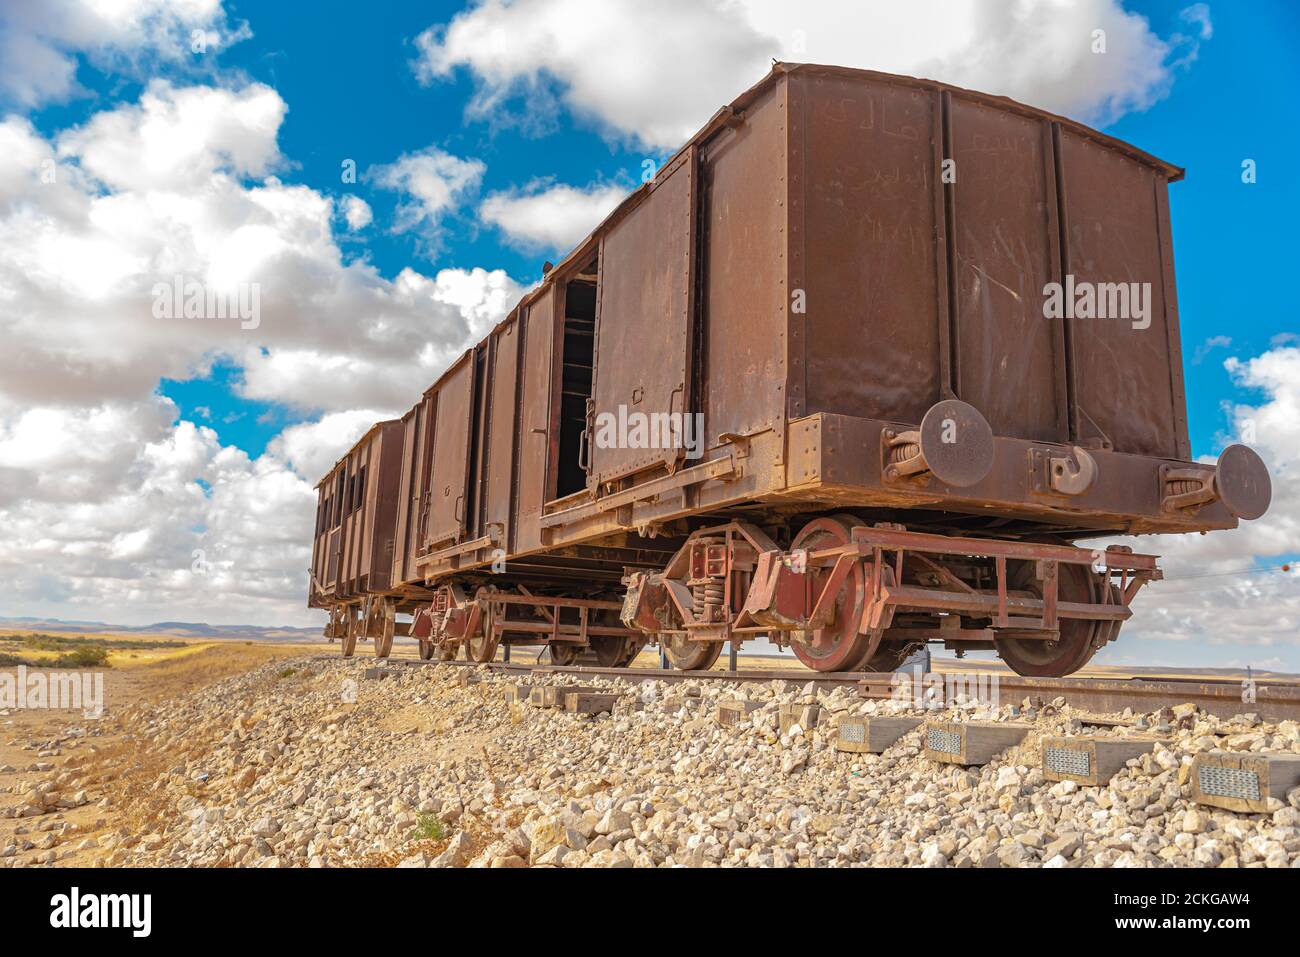 Rusty, deserted railcar on a disused sidetrack in the Negev desert, Israel Stock Photo